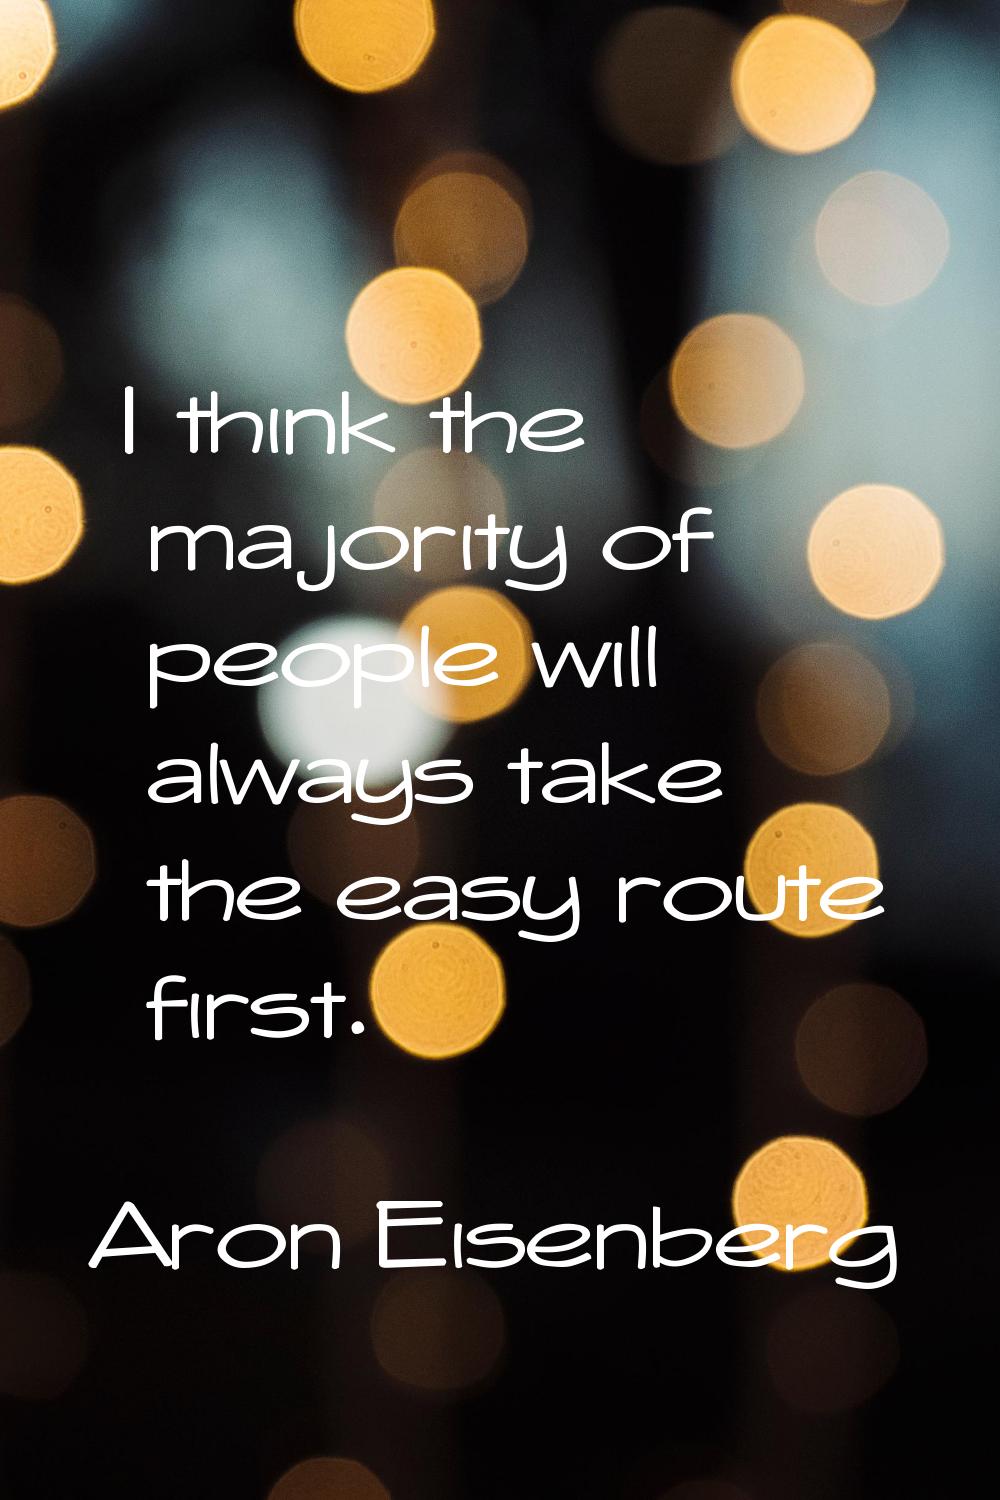 I think the majority of people will always take the easy route first.